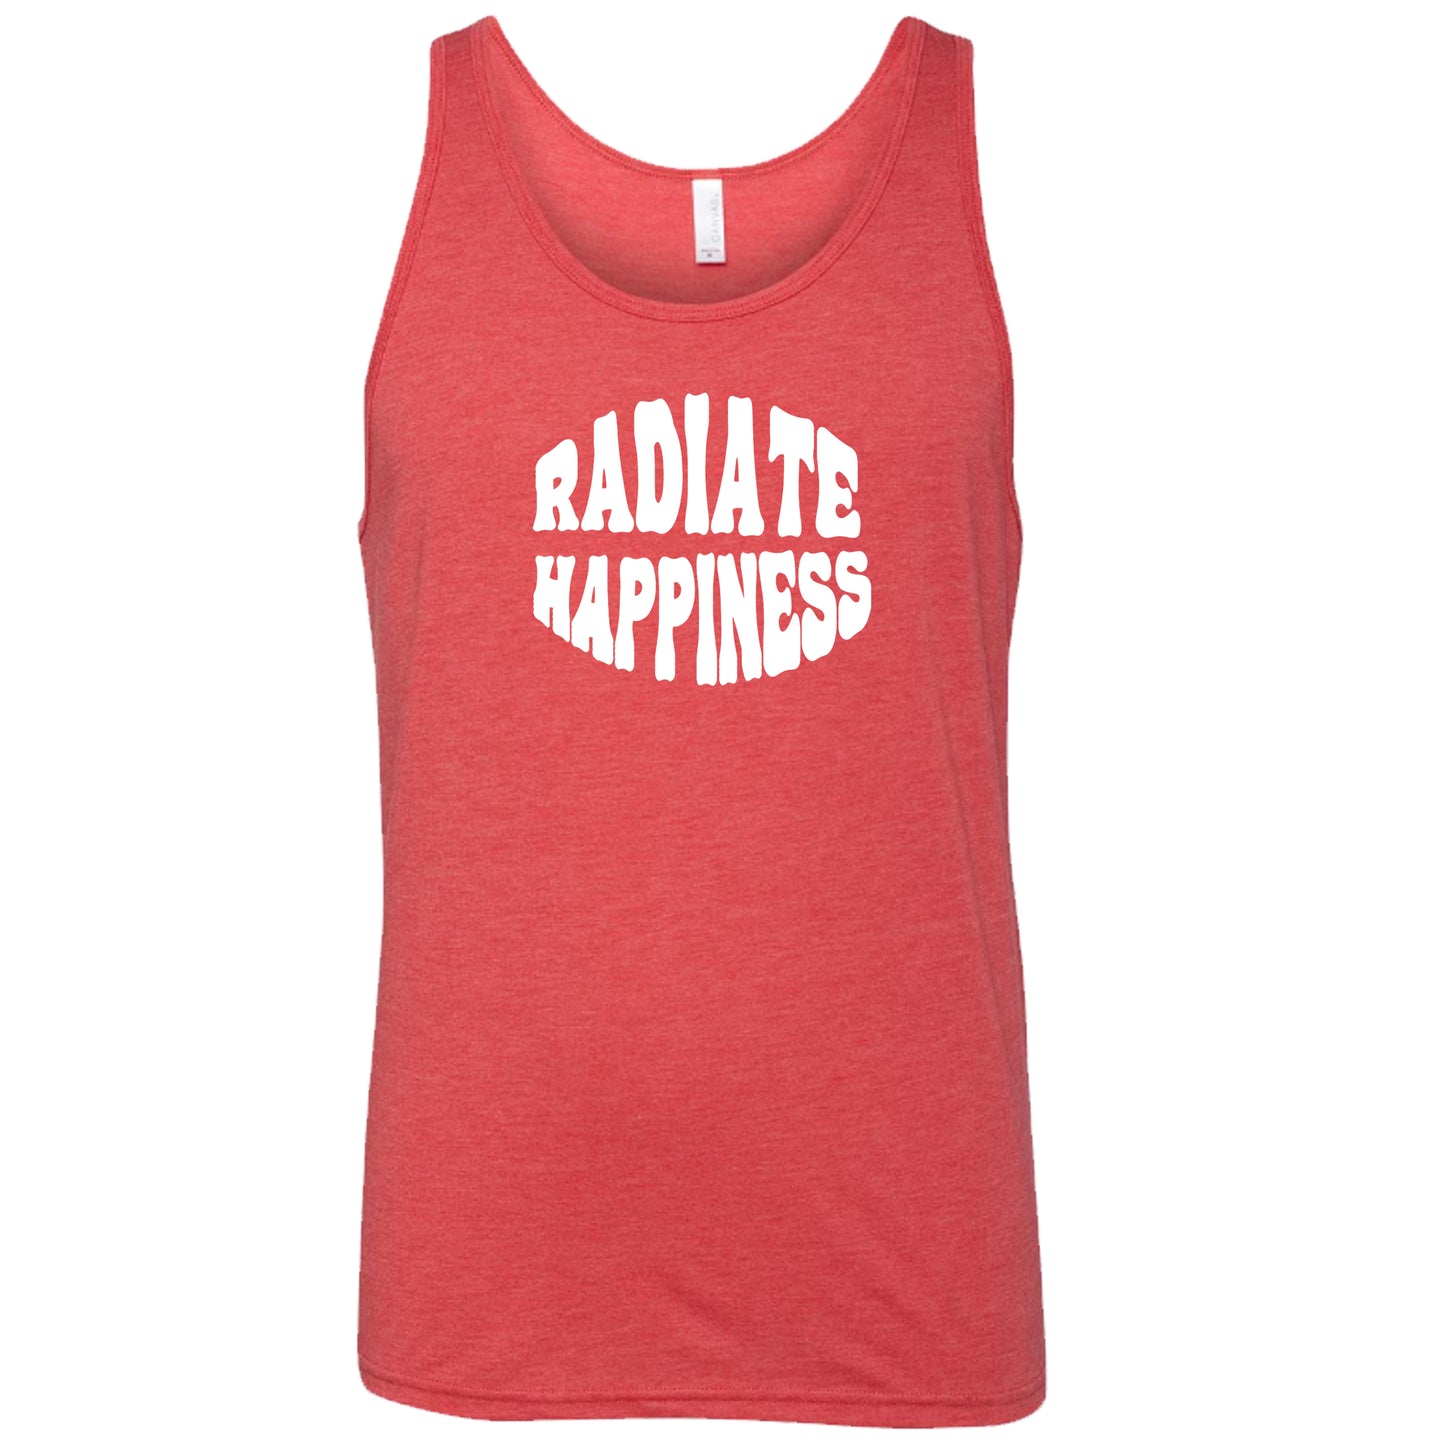 radiate happiness red tank